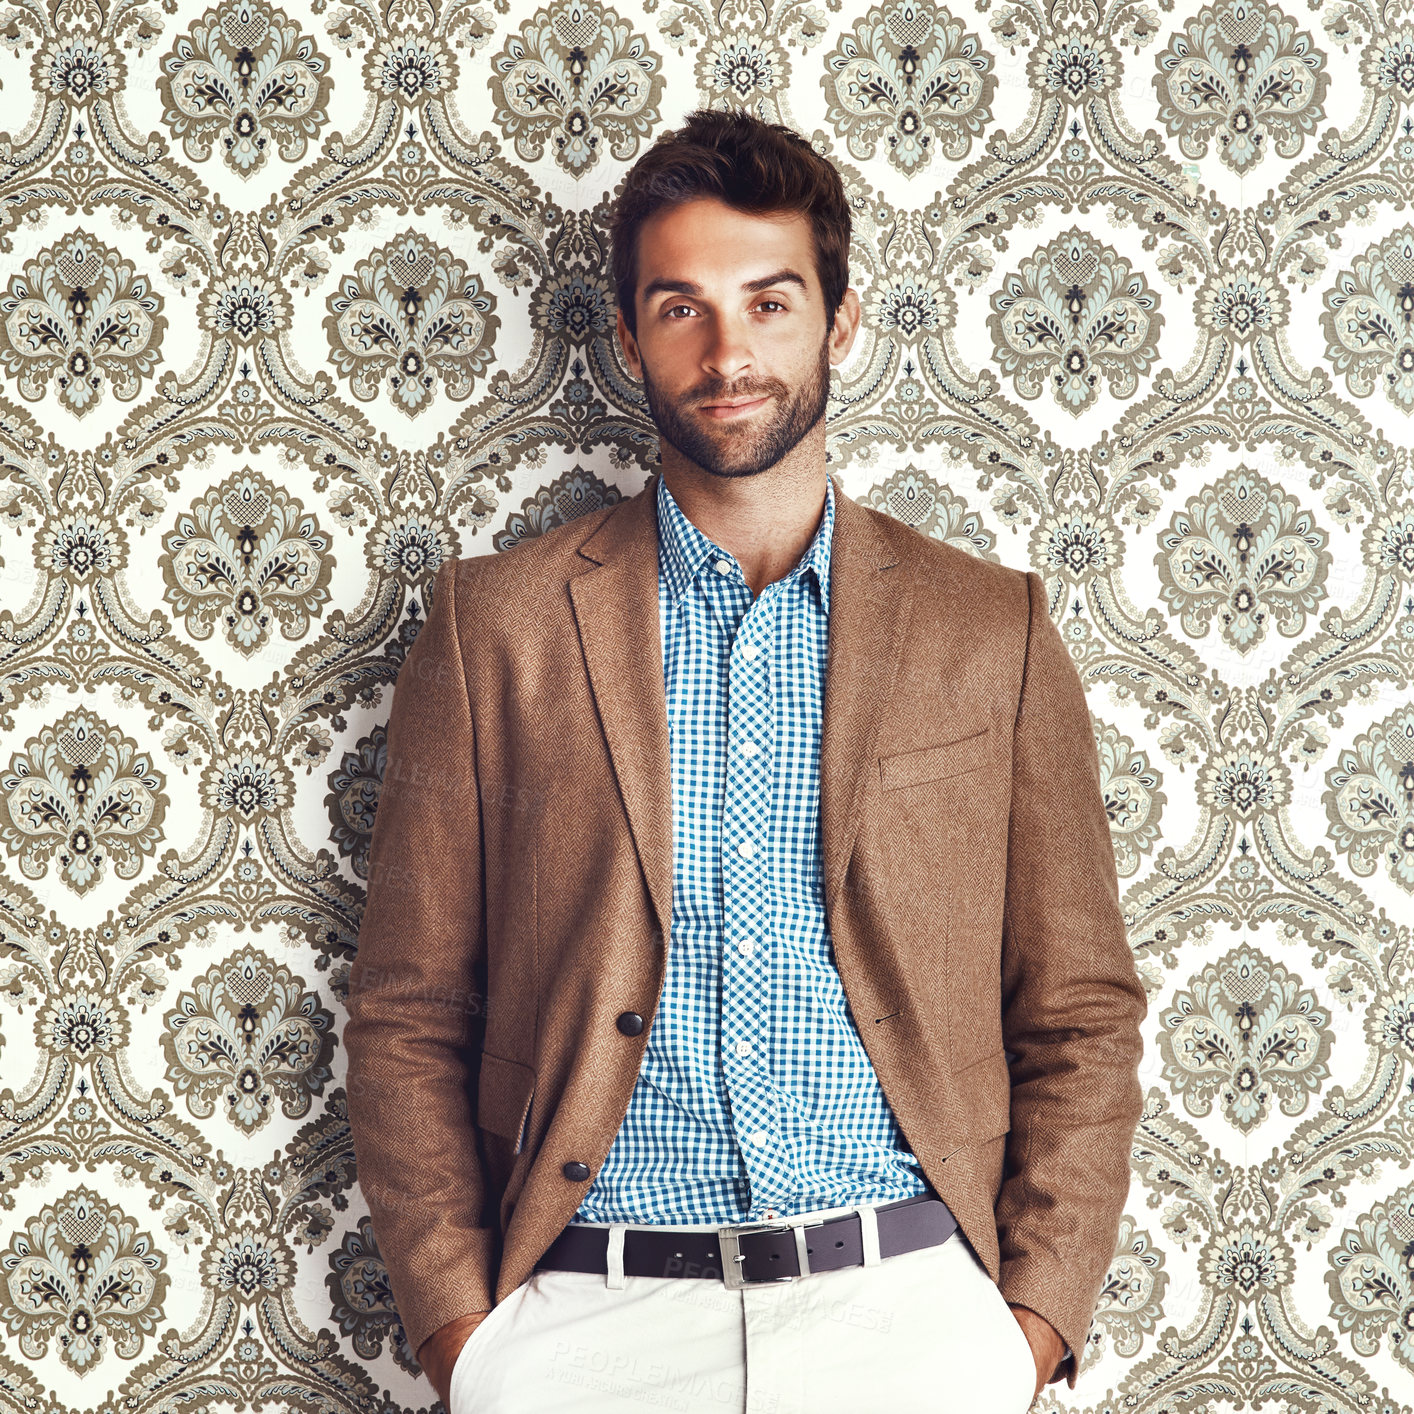 Buy stock photo Portrait of a stylishly dressed young man posing against a wallpaper background